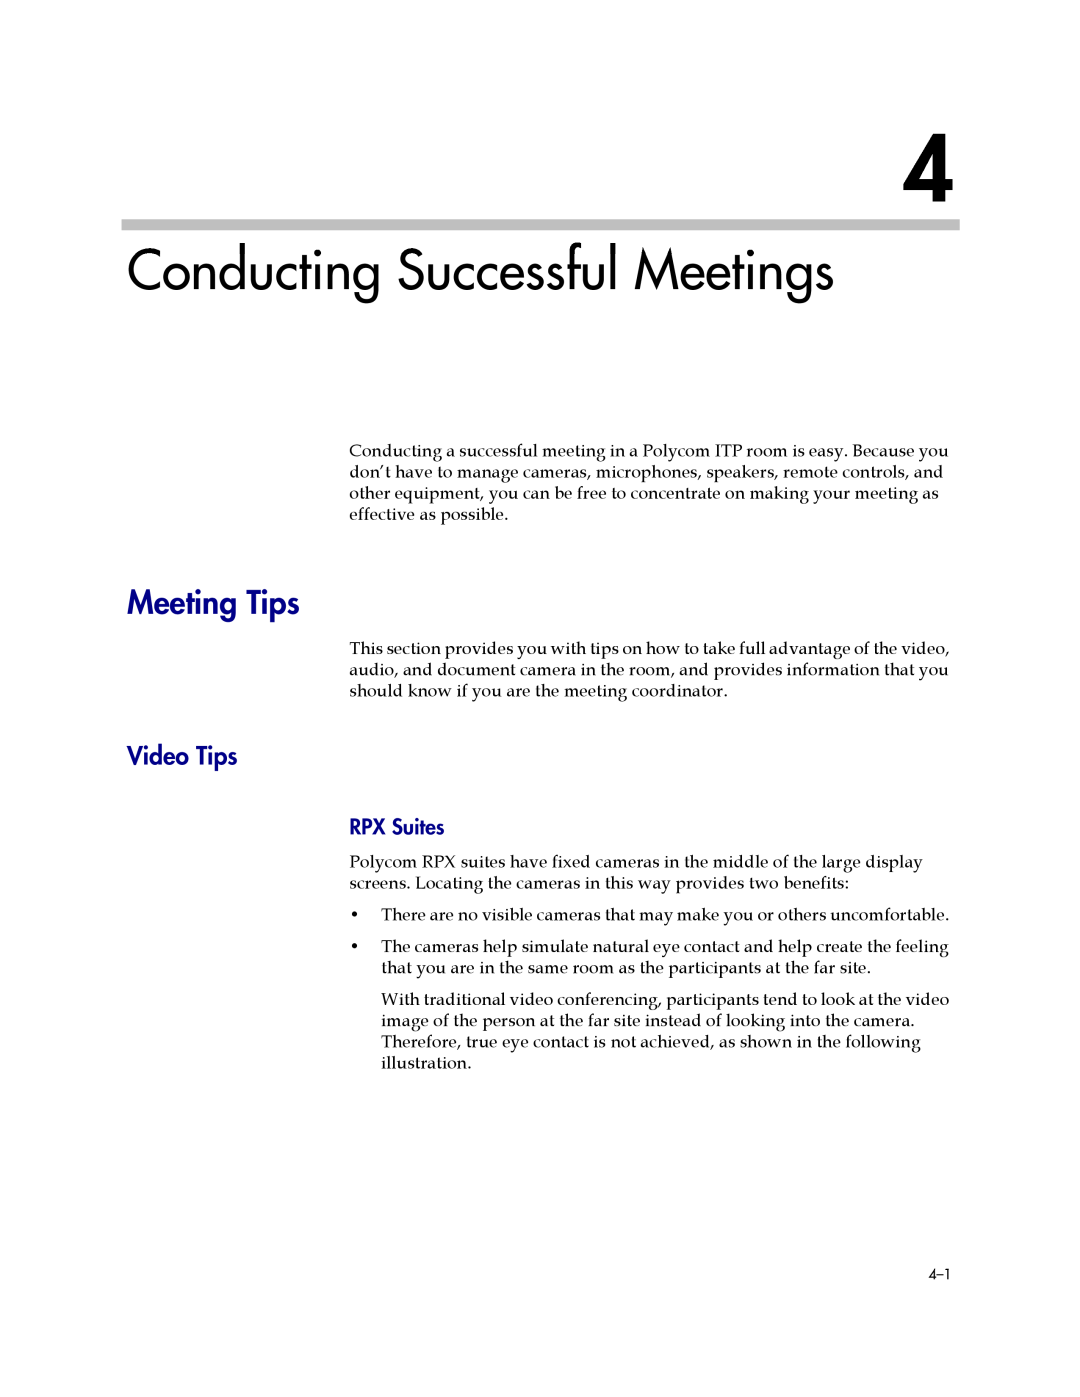 Polycom 3725-63211-002, A manual Conducting Successful Meetings, Meeting Tips, Video Tips, RPX Suites 